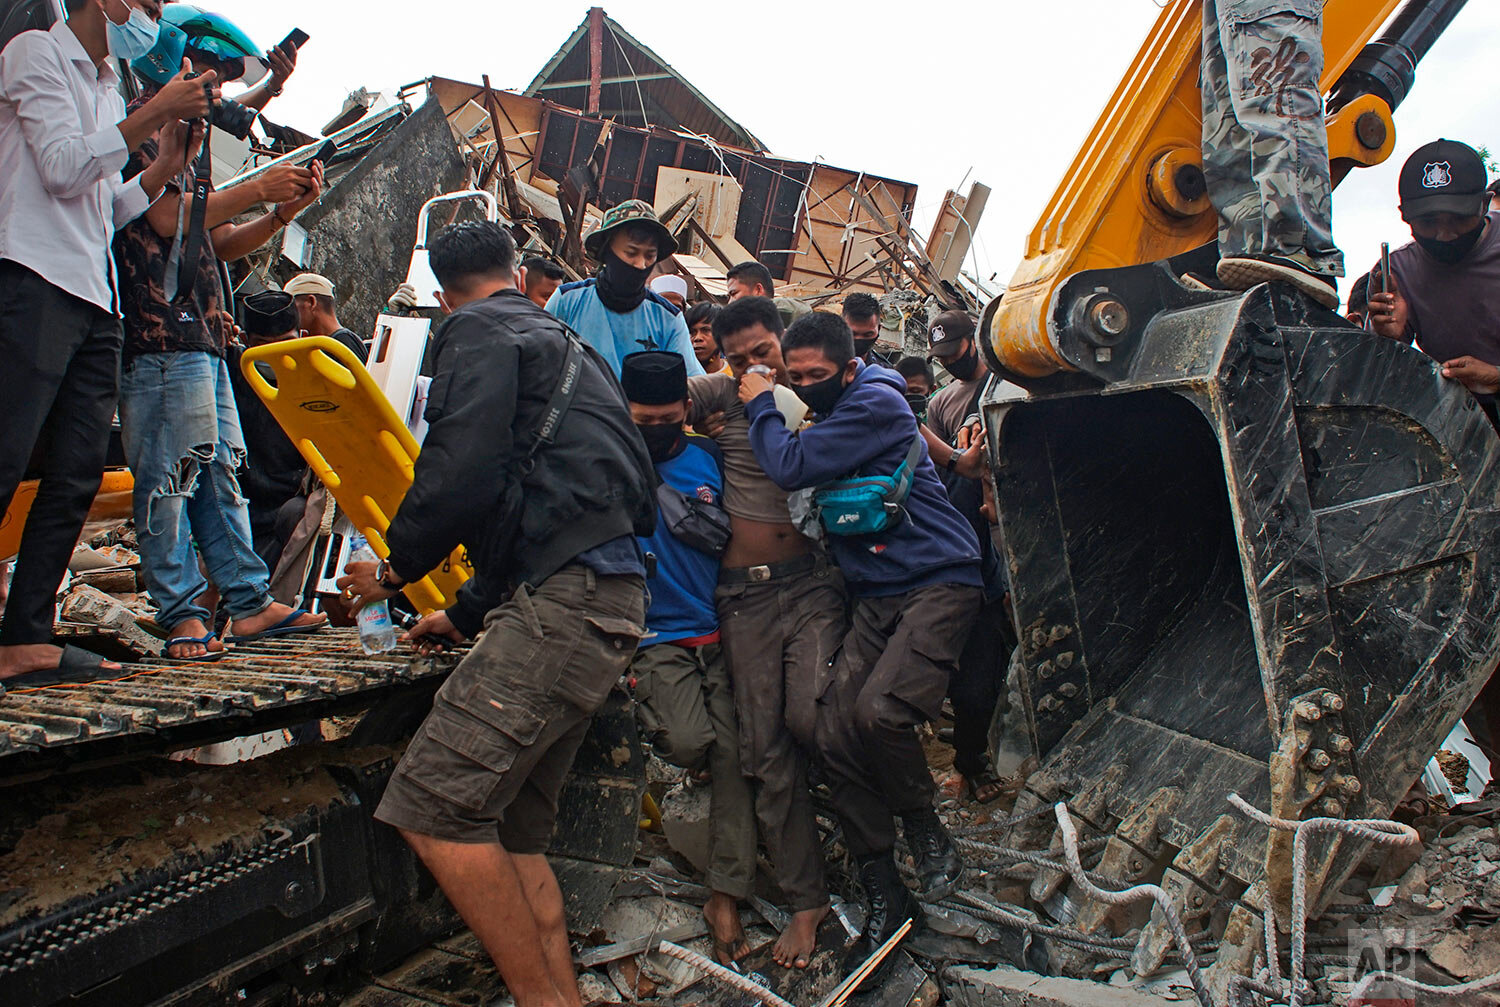  Rescuers assist a survivor pulled out from the ruin of a government building collapsed during an earthquake in Mamuju, West Sulawesi, Indonesia, Friday, Jan. 15, 2021.  (AP Photo/Azhari Surahman) 